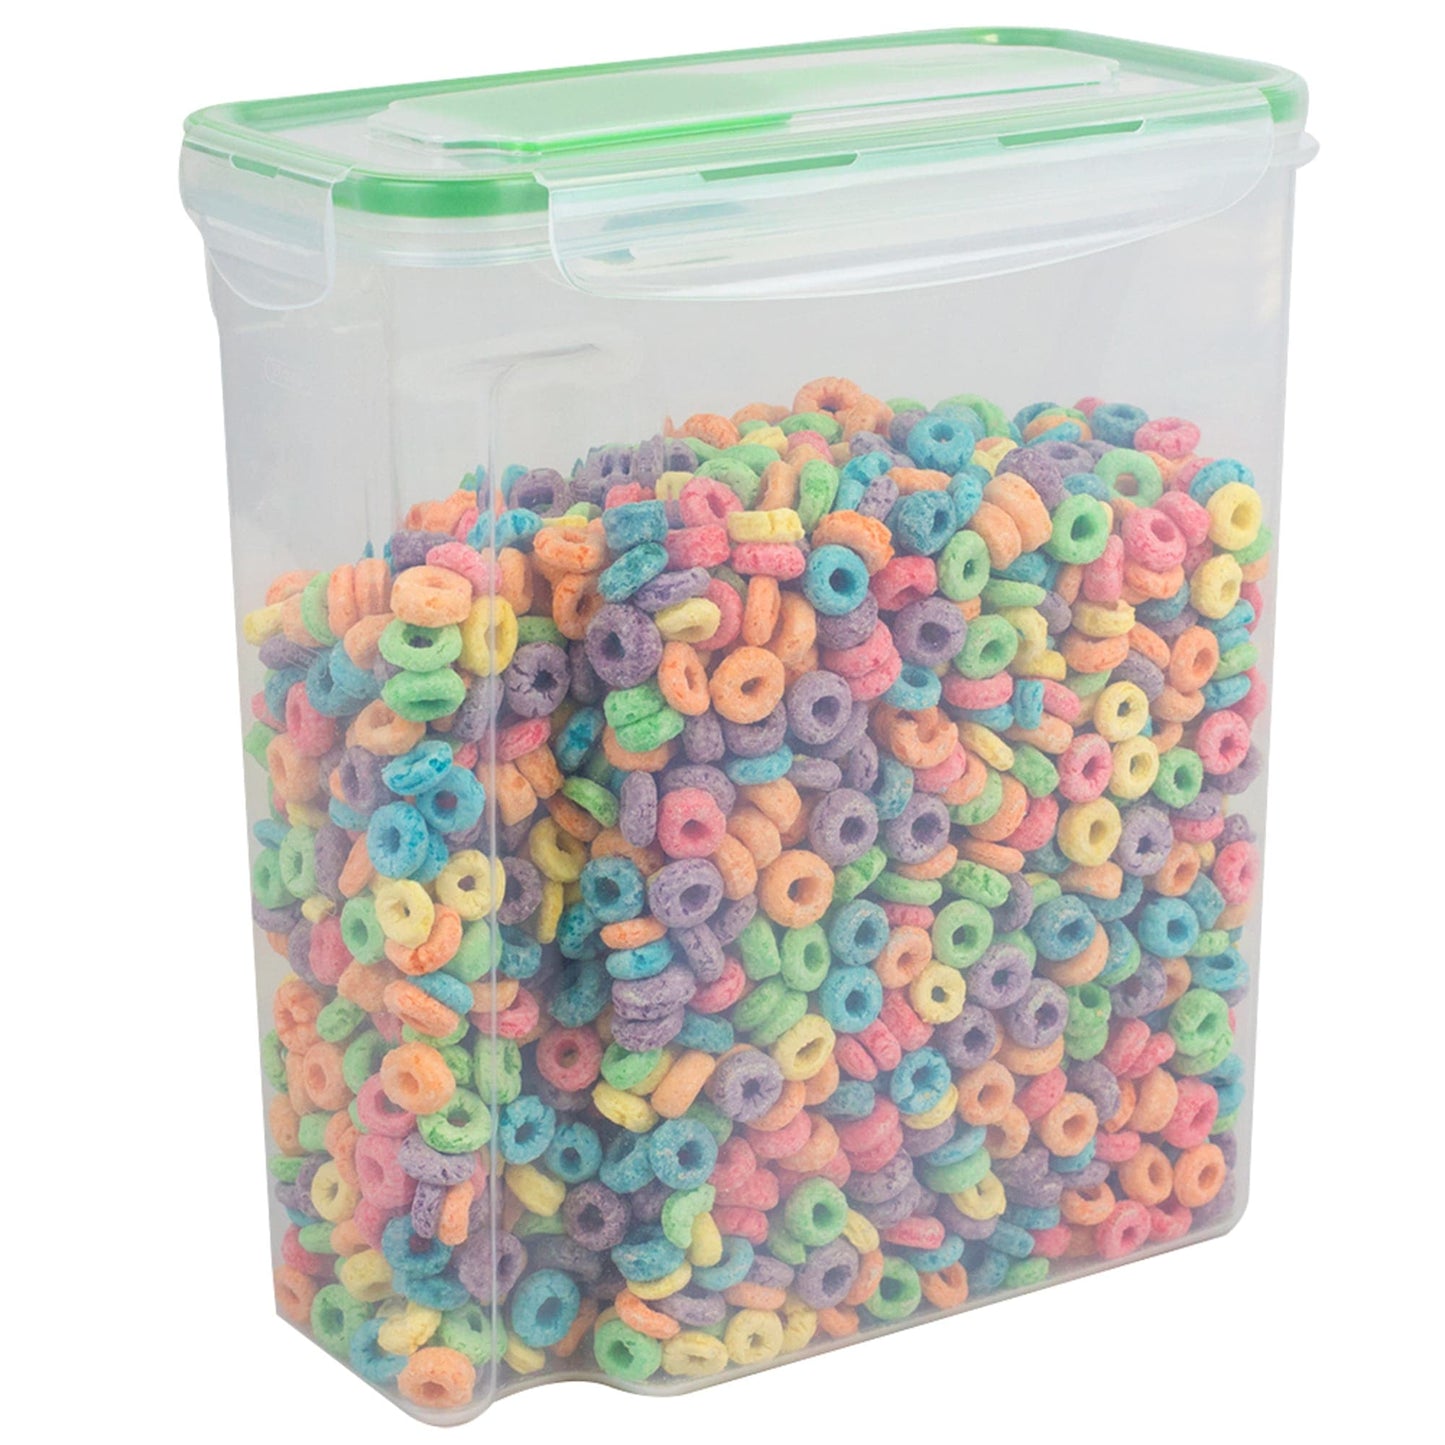 Save on Goodcook Cereal Container Side Latching 24.4 Cups Order